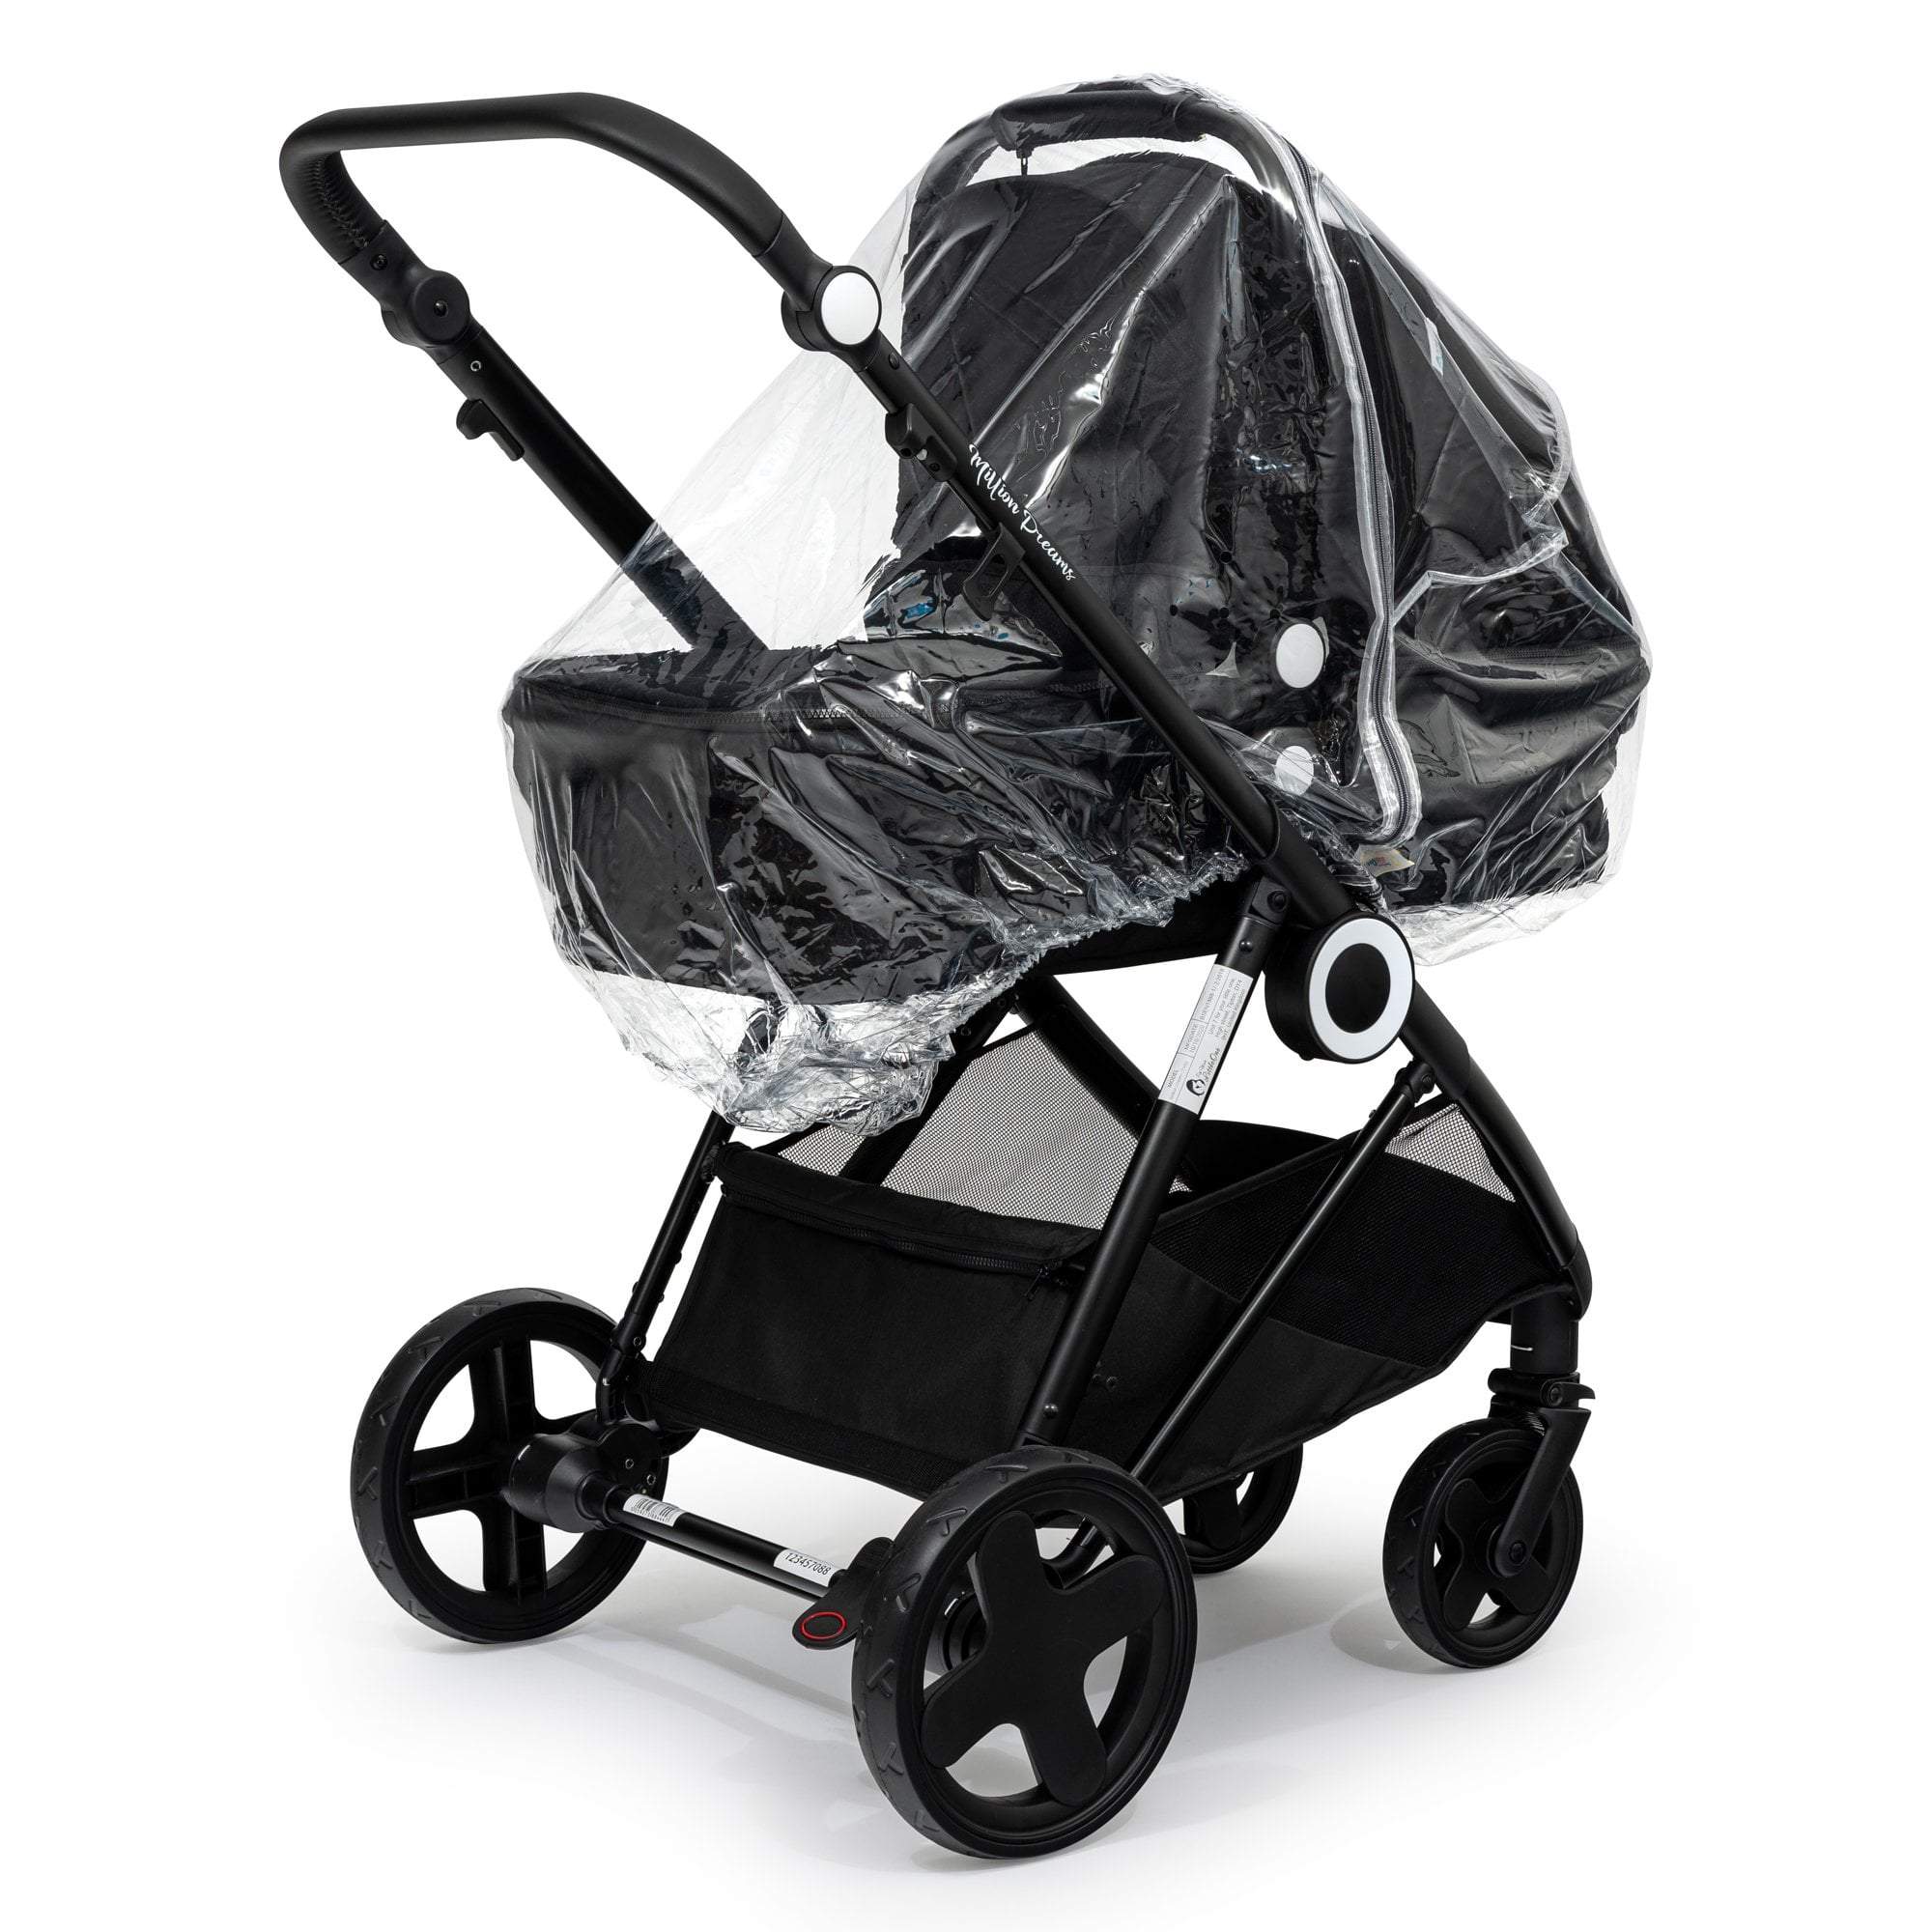 Carrycot Raincover Compatible With Quinny - Fits All Models - For Your Little One